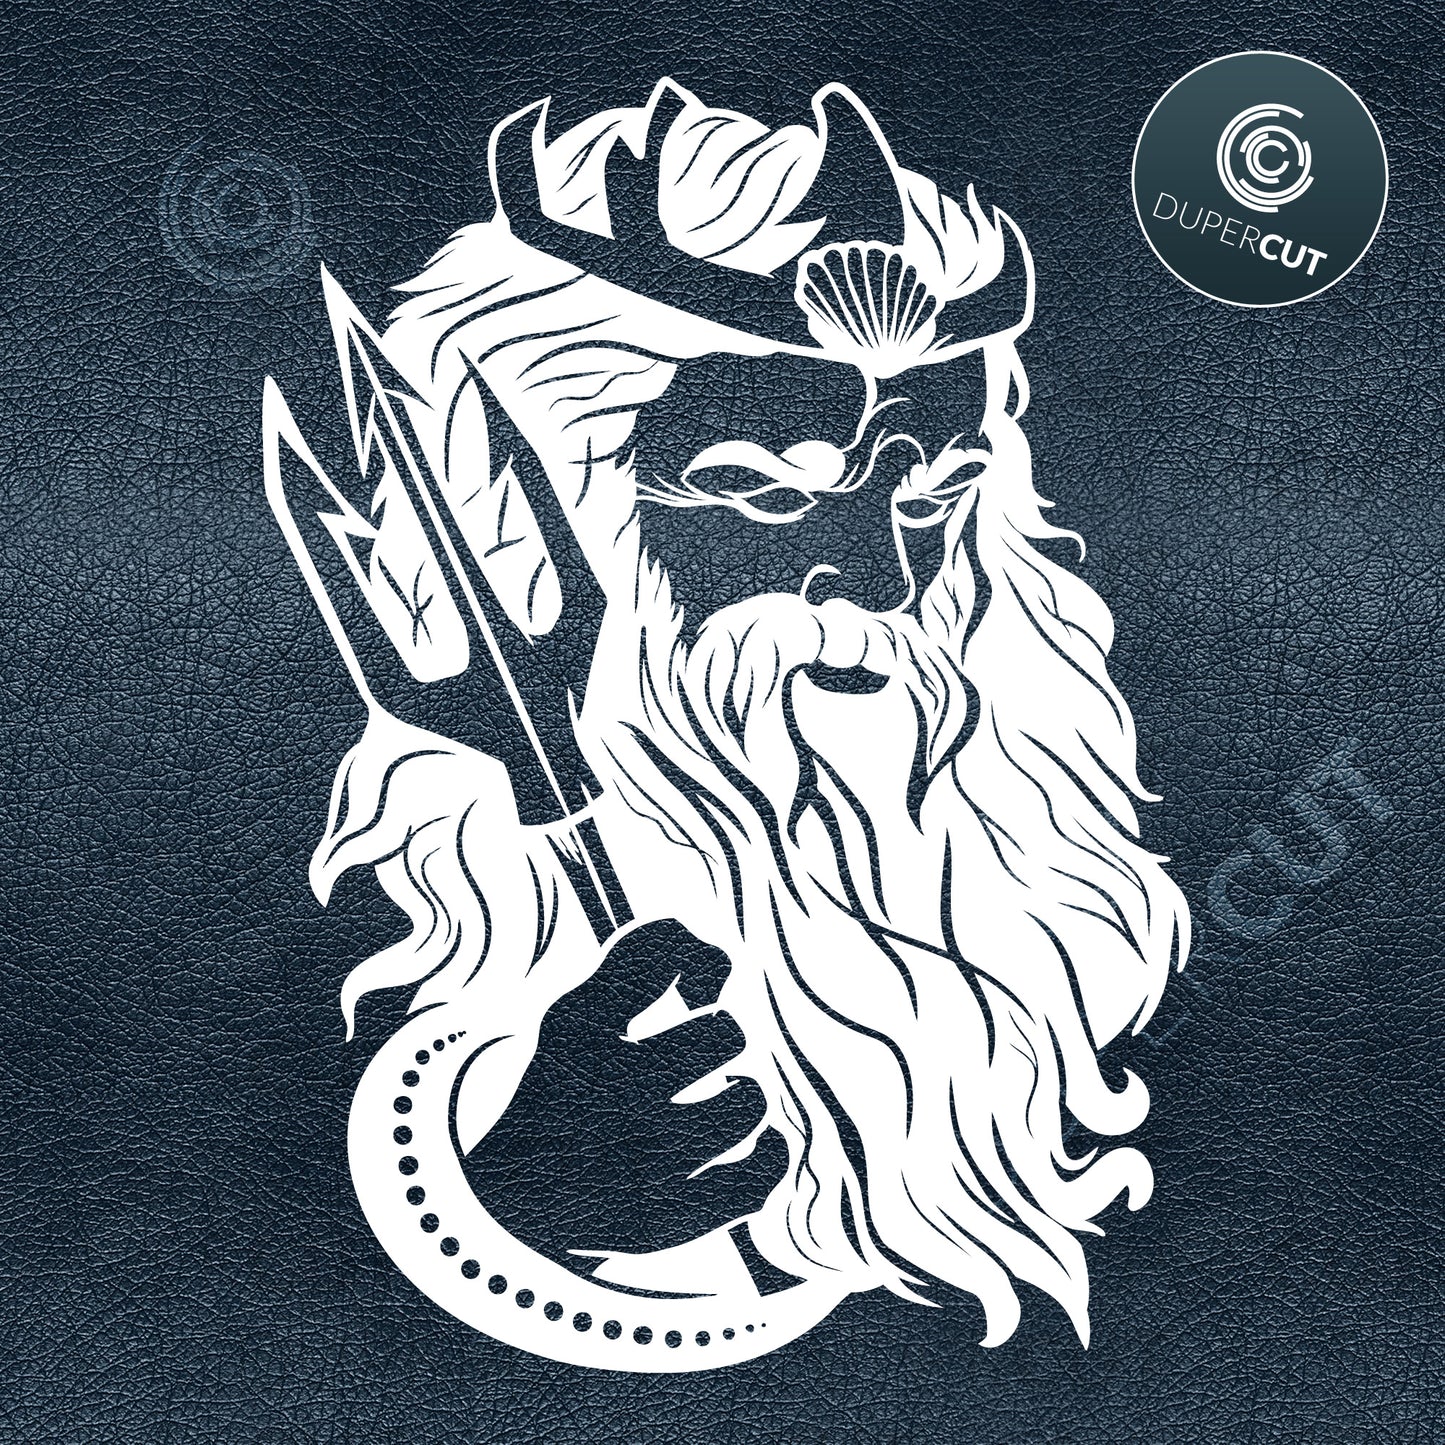 Poseidon/Neptune god illustration. SVG JPEG DXF files. Template for paper cutting, laser, print on demand. For use with Cricut, Glowforge, Silhouette Cameo, CNC machines. Personal or commercial license.